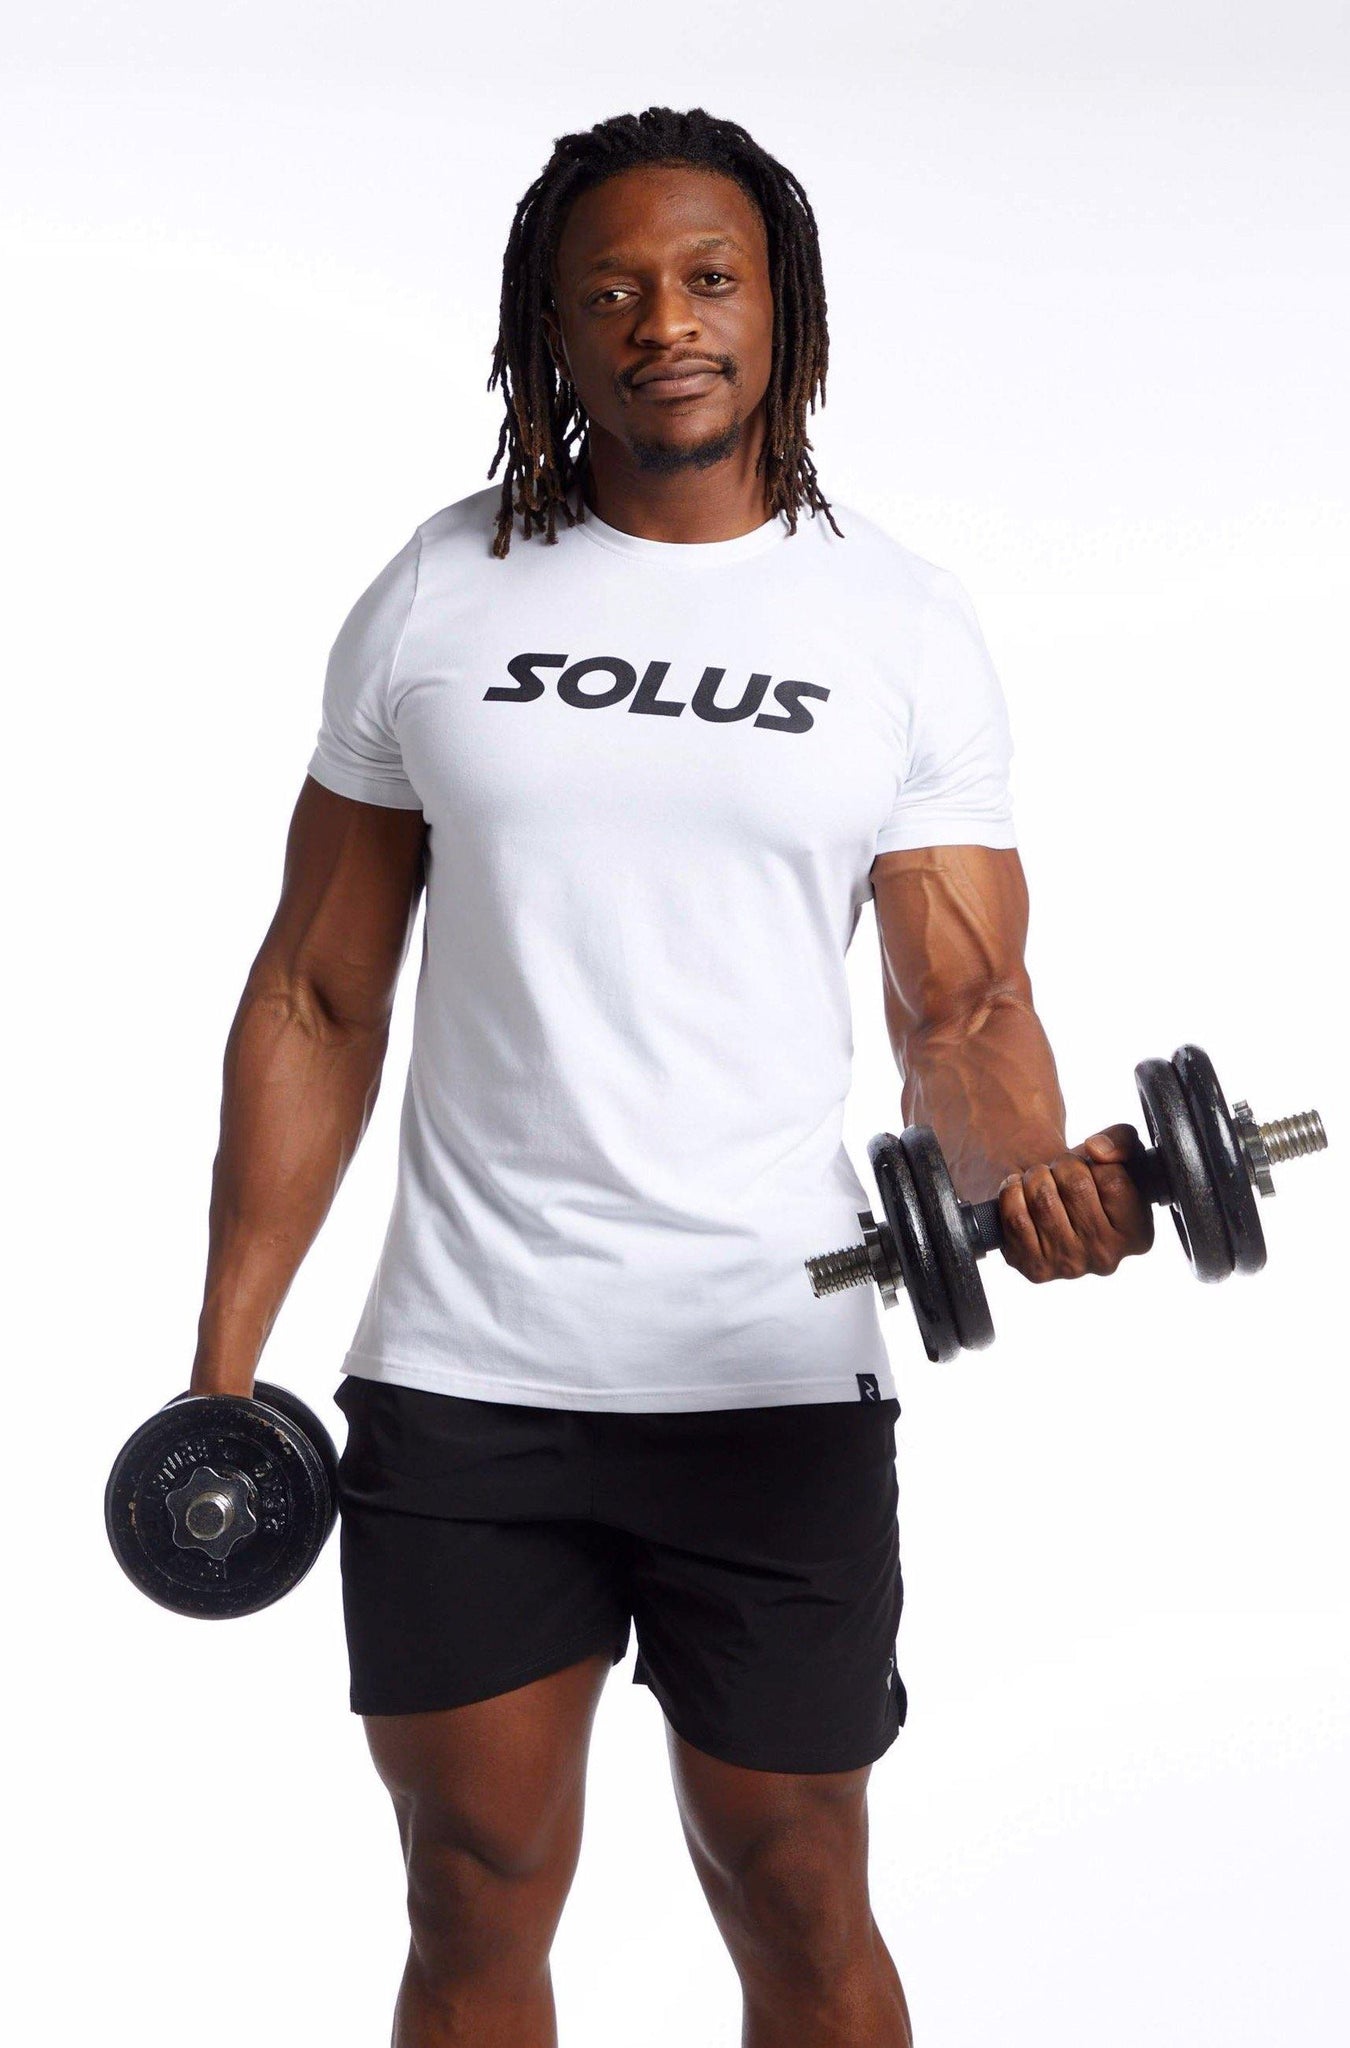 The Ace T-Shirt - Solus